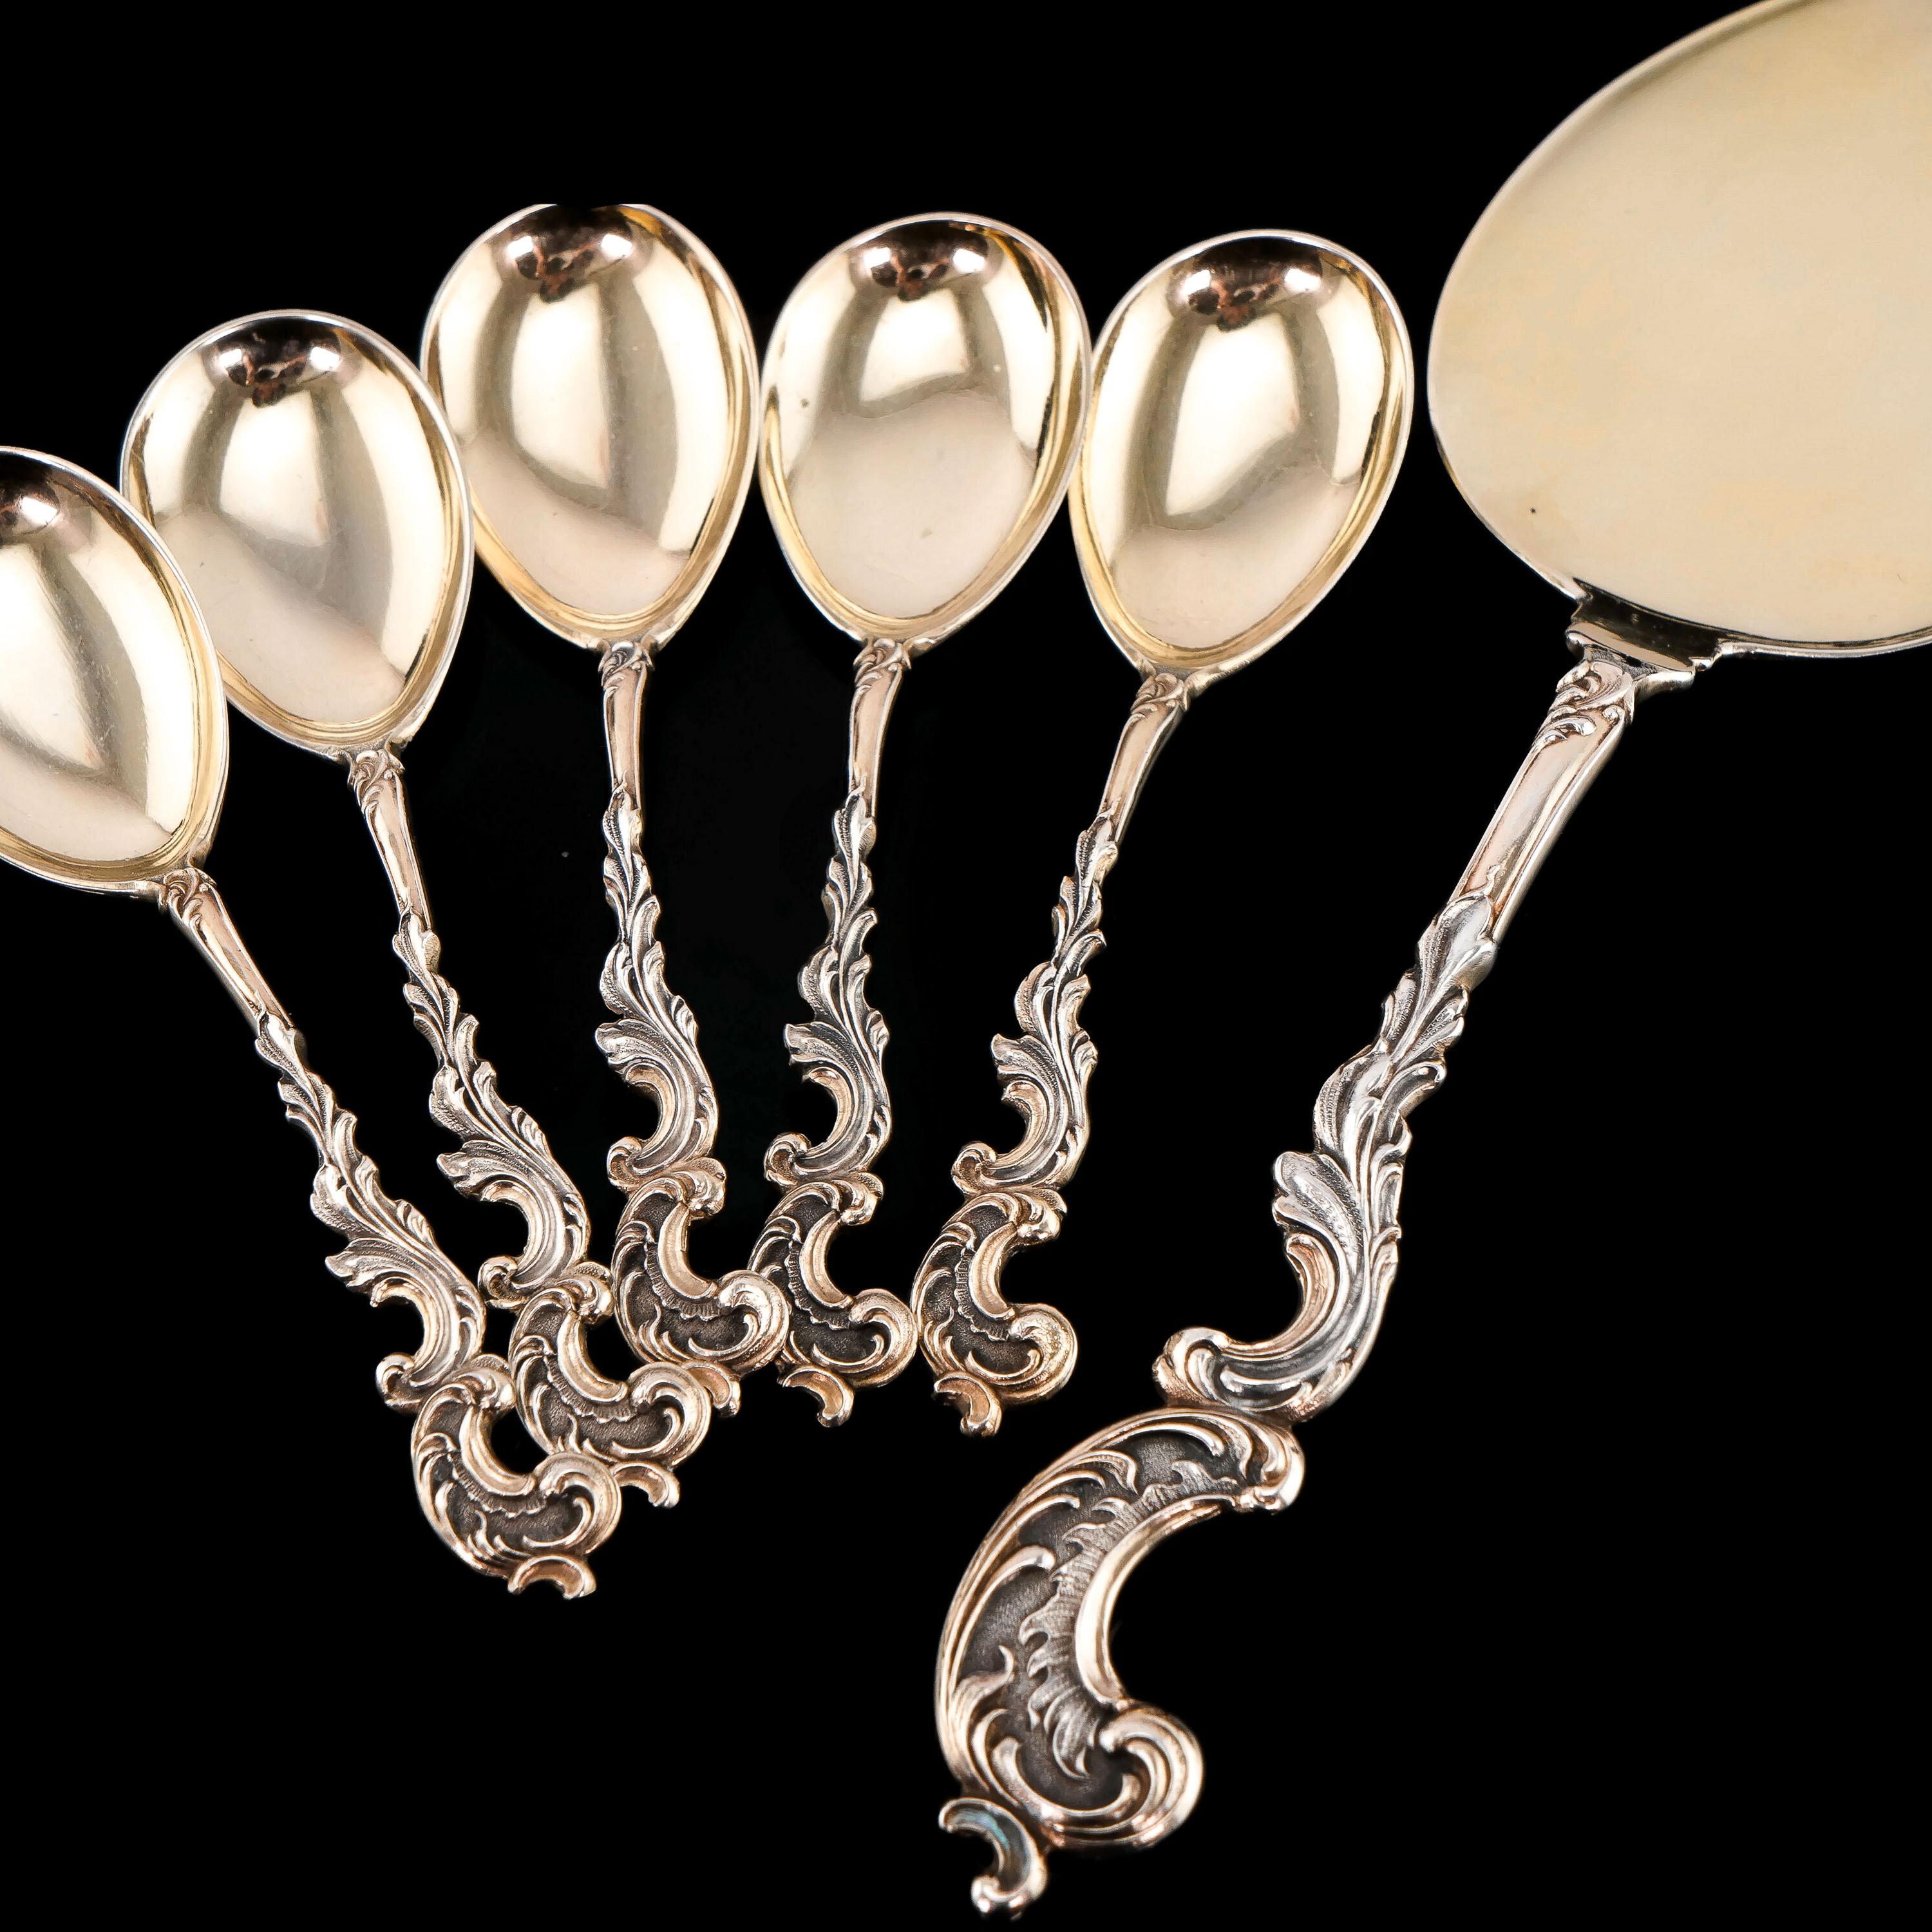 We are delighted to offer this beautiful set of solid silver gilt German ice cream server/spoons made c.1900.
 
The set is ornamented in Rococo style with wonderful fluid and ornate decorative motifs of acanthus leaves, scrolls and swirls. 
 
The